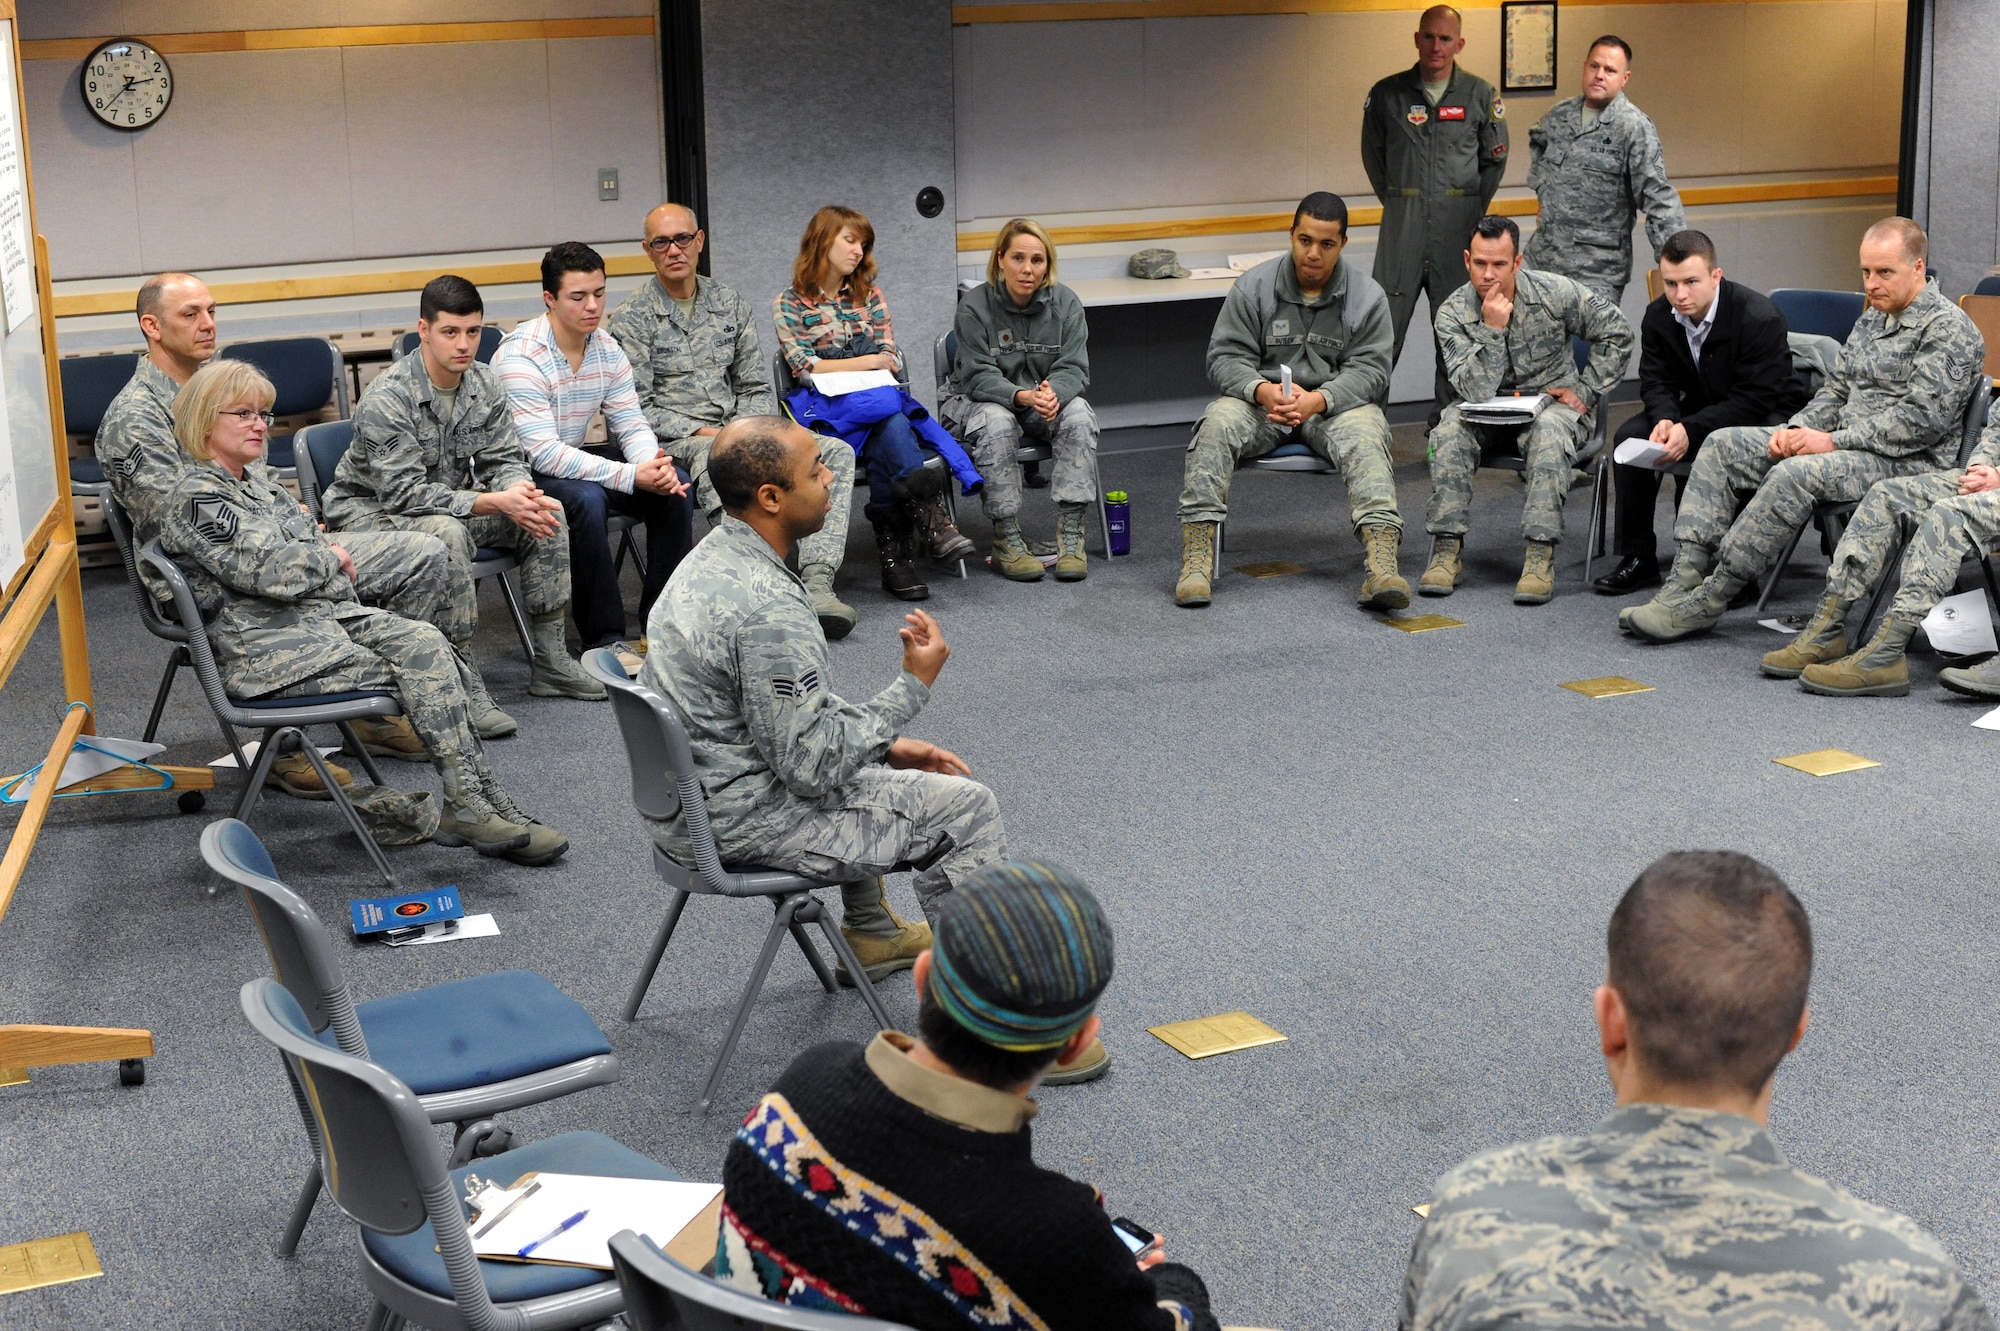 Oregon Air National Guard Senior Airman Brandon Bingham sits in the center circle during a group activity as part of the 142nd Fighter Wing’s Diversity and Inclusion Counsel meeting, Feb. 8, 2015, Portland Air National Guard Base, Ore. The Diversity and Inclusion Counsel helps foster communication by recognizing that a diverse set of experiences, perspectives, and backgrounds are crucial to mission success. (U.S. Air National Guard photo by Tech. Sgt. John Hughel, 142nd Fighter Wing Public Affairs/Released)